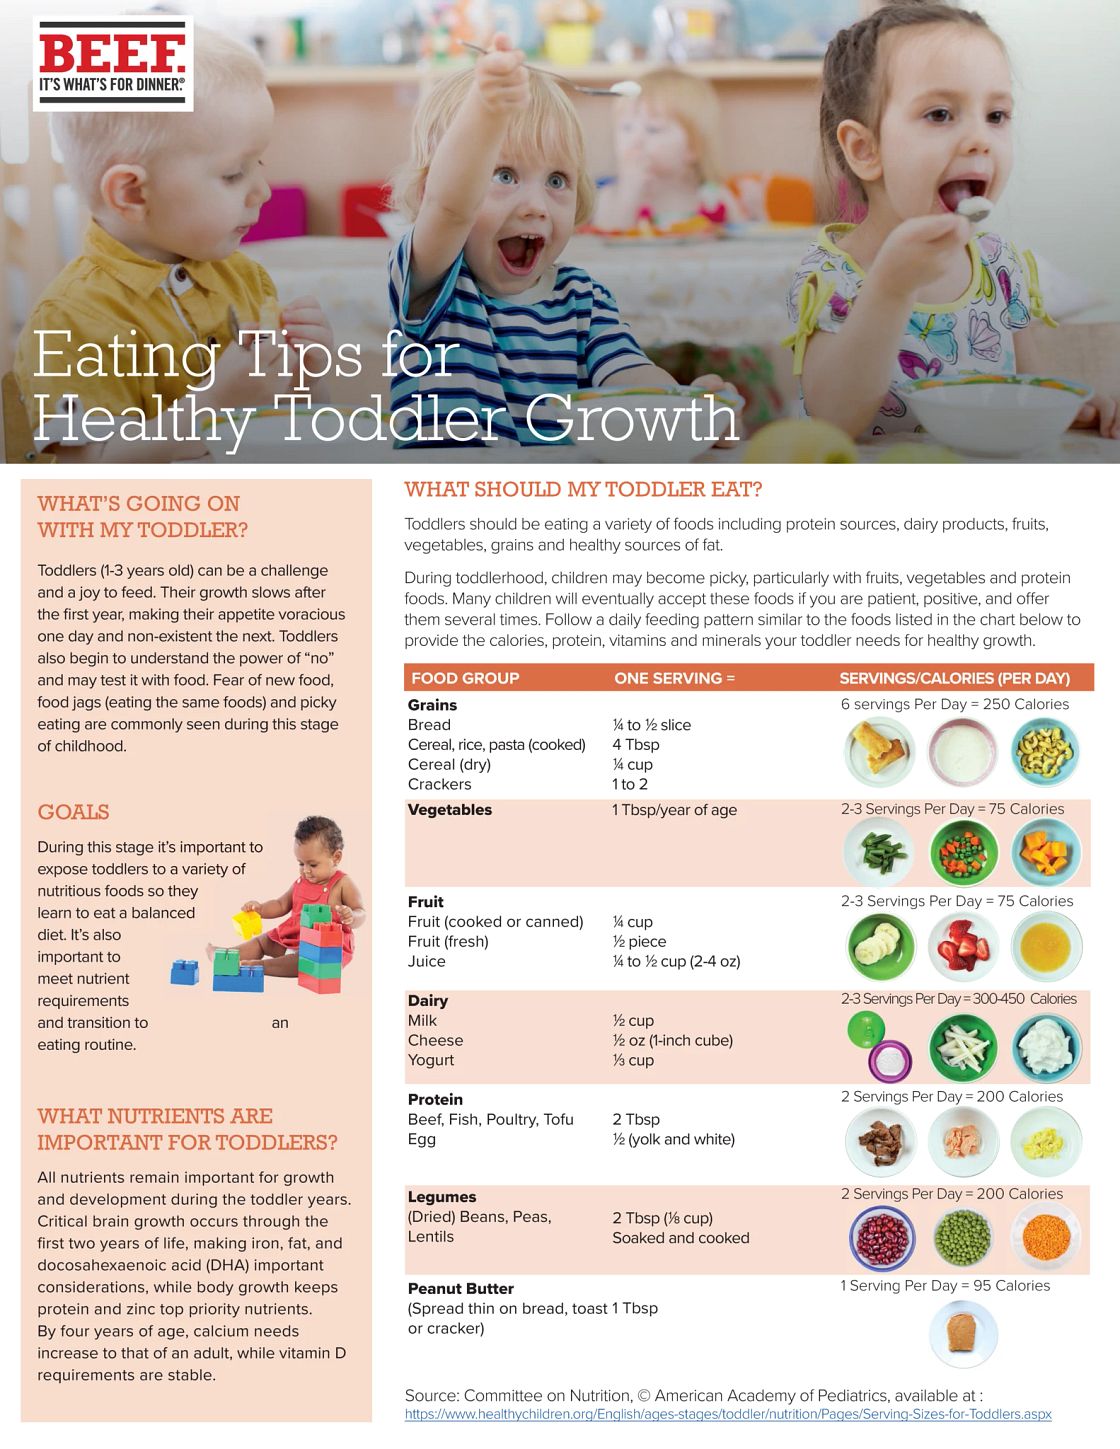 Baby Feeding Schedule: Tips for the First Year